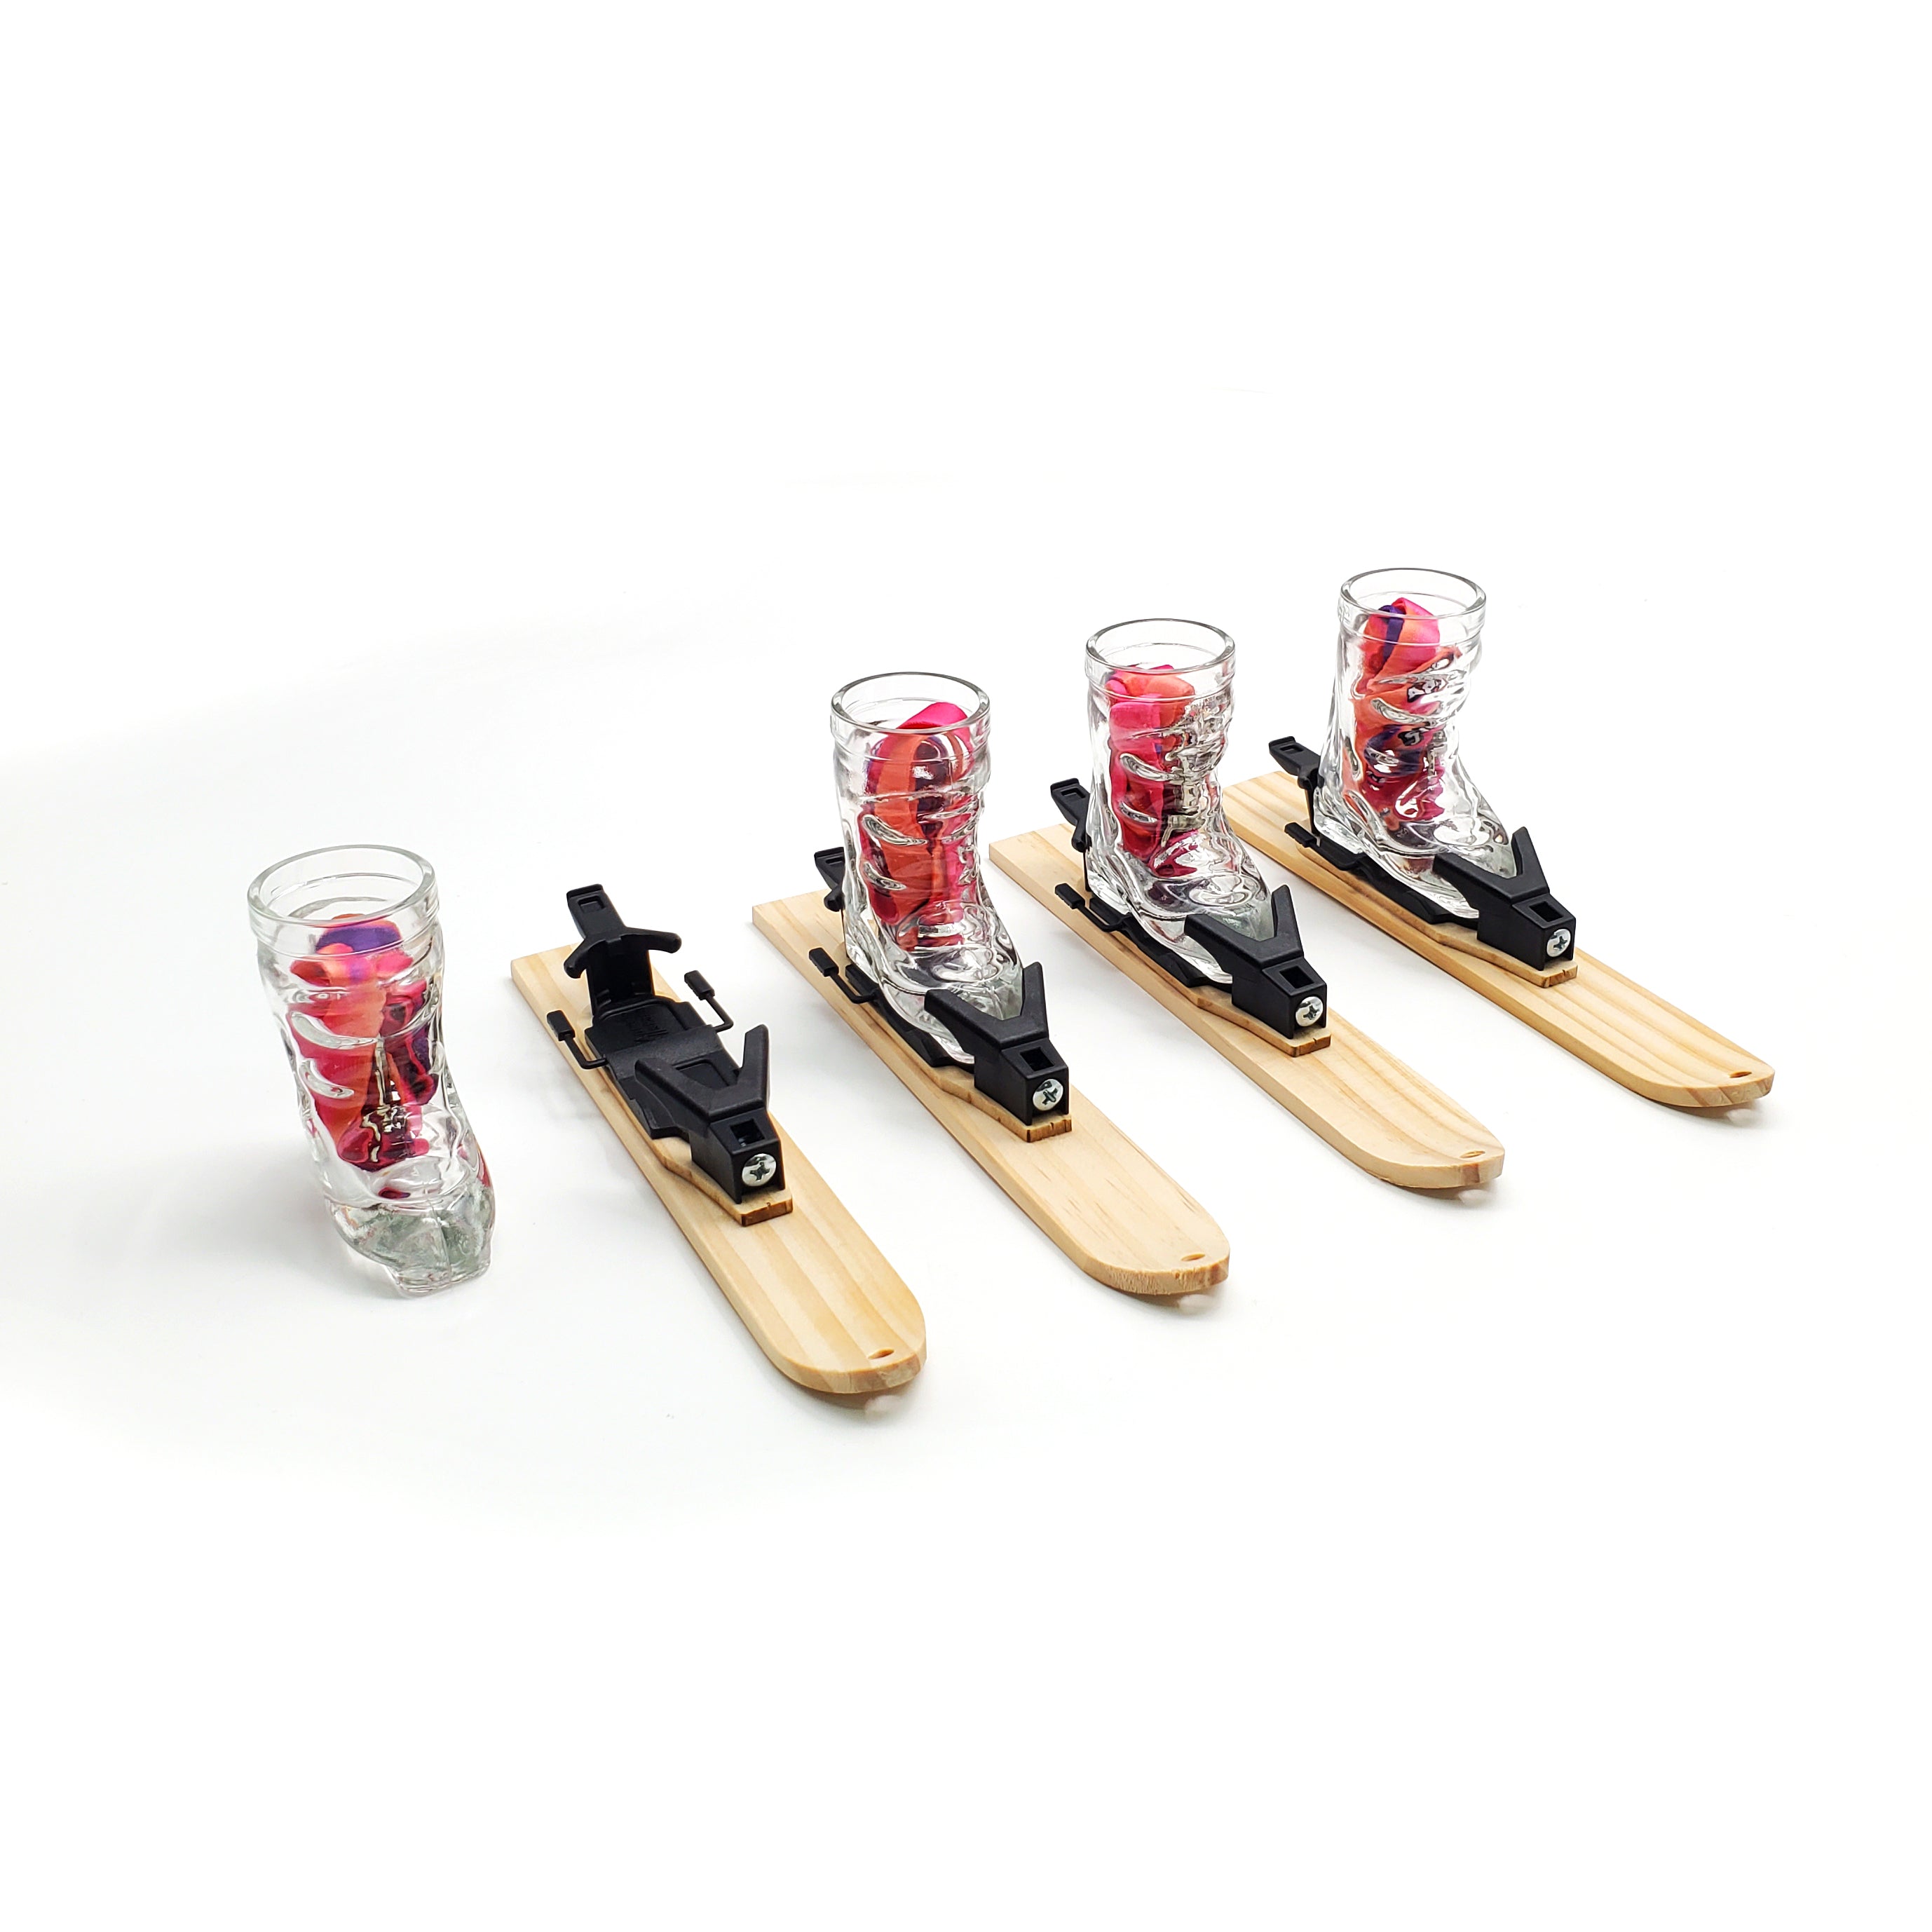 Photo of 4 wooden trays in the shape of small skis. Each ski tray has a hole drilled into the tip of the ski and a small raised mounting platform for the Apres Allstar boot shot glass and bindings that are shown mounted on the mini skis. A red lanyard is sitting inside the glass. Image is set against a white backdrop